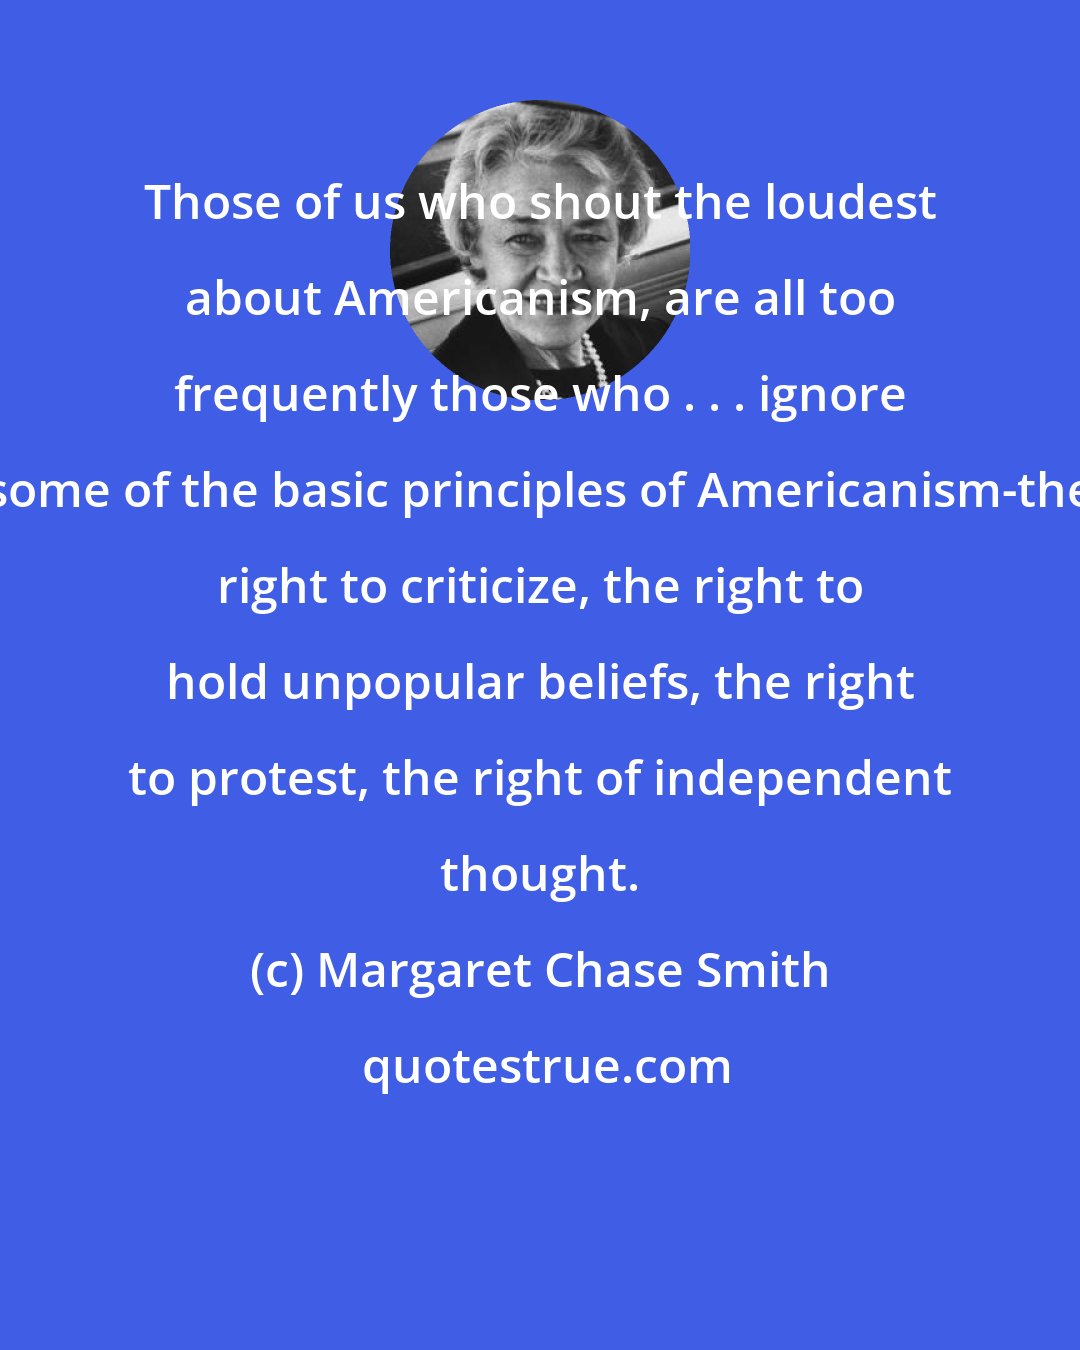 Margaret Chase Smith: Those of us who shout the loudest about Americanism, are all too frequently those who . . . ignore some of the basic principles of Americanism-the right to criticize, the right to hold unpopular beliefs, the right to protest, the right of independent thought.